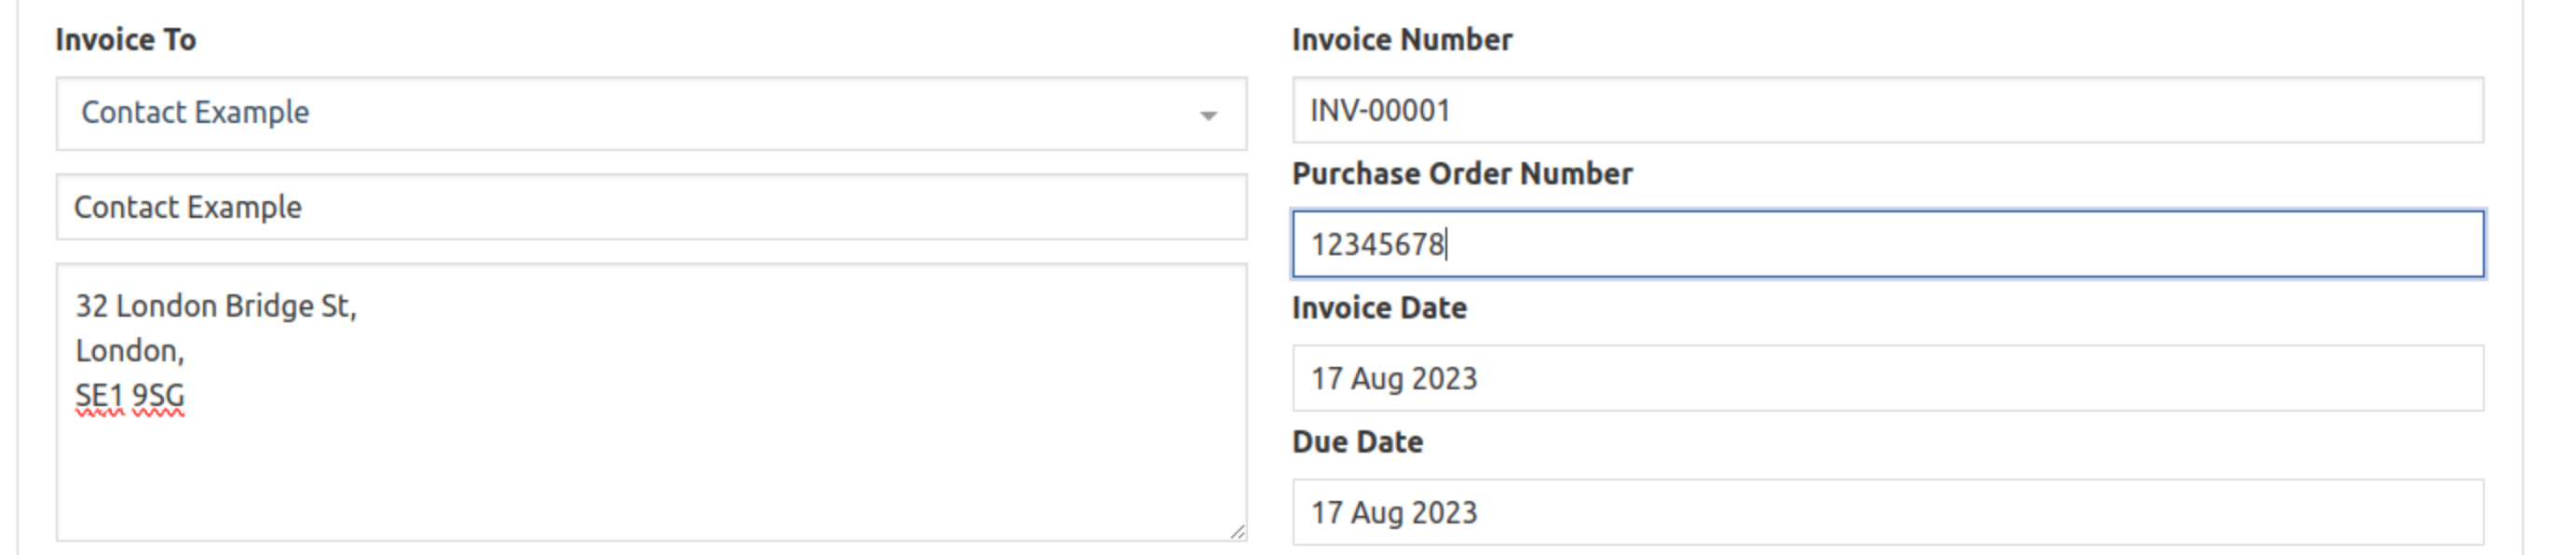 My Tax Digital Invoice To details